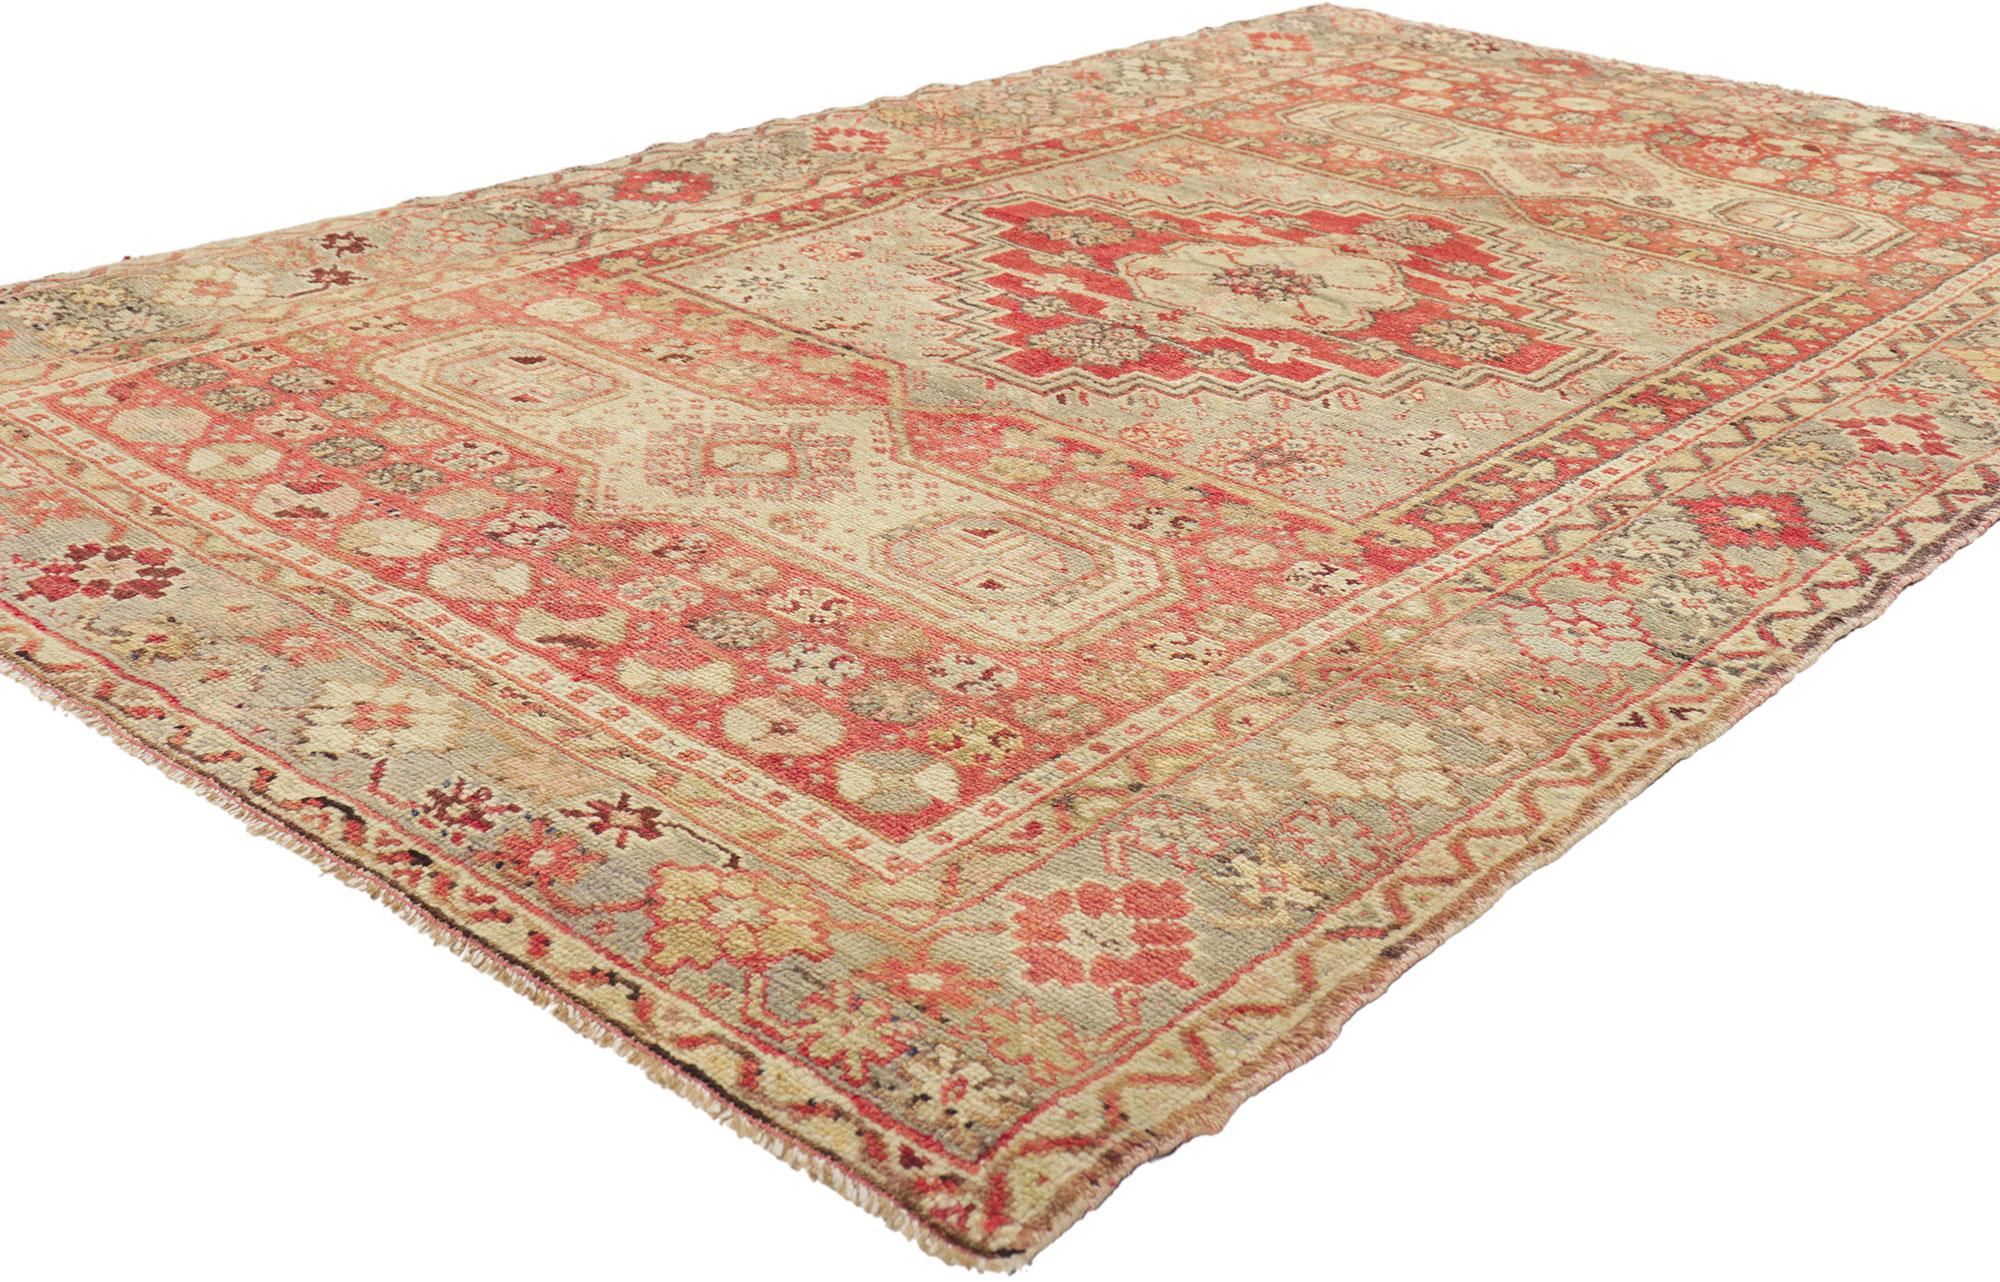 50654 Vintage Turkish Oushak Rug, 04'03 x 07'01.
This hand knotted wool vintage Turkish Oushak rug features a stepped lozenge medallion flanked by two cartouches surrounded by a variety of ancient Anatolian symbols. It is enclosed with a geometric